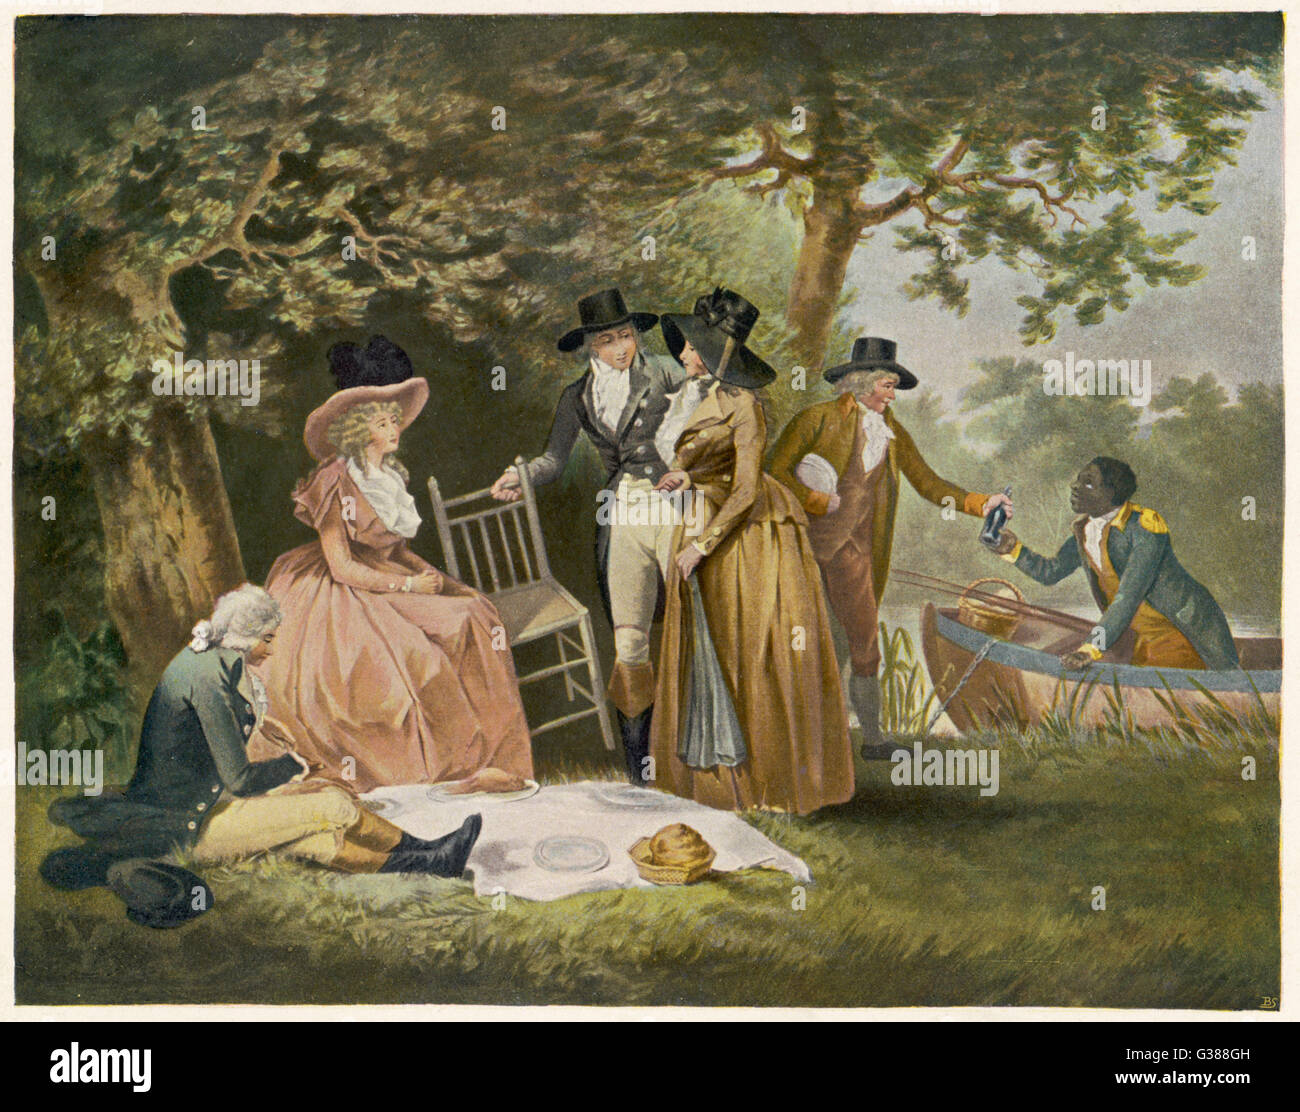 The Anglers' repast - a picnic         Date: 18th century Stock Photo